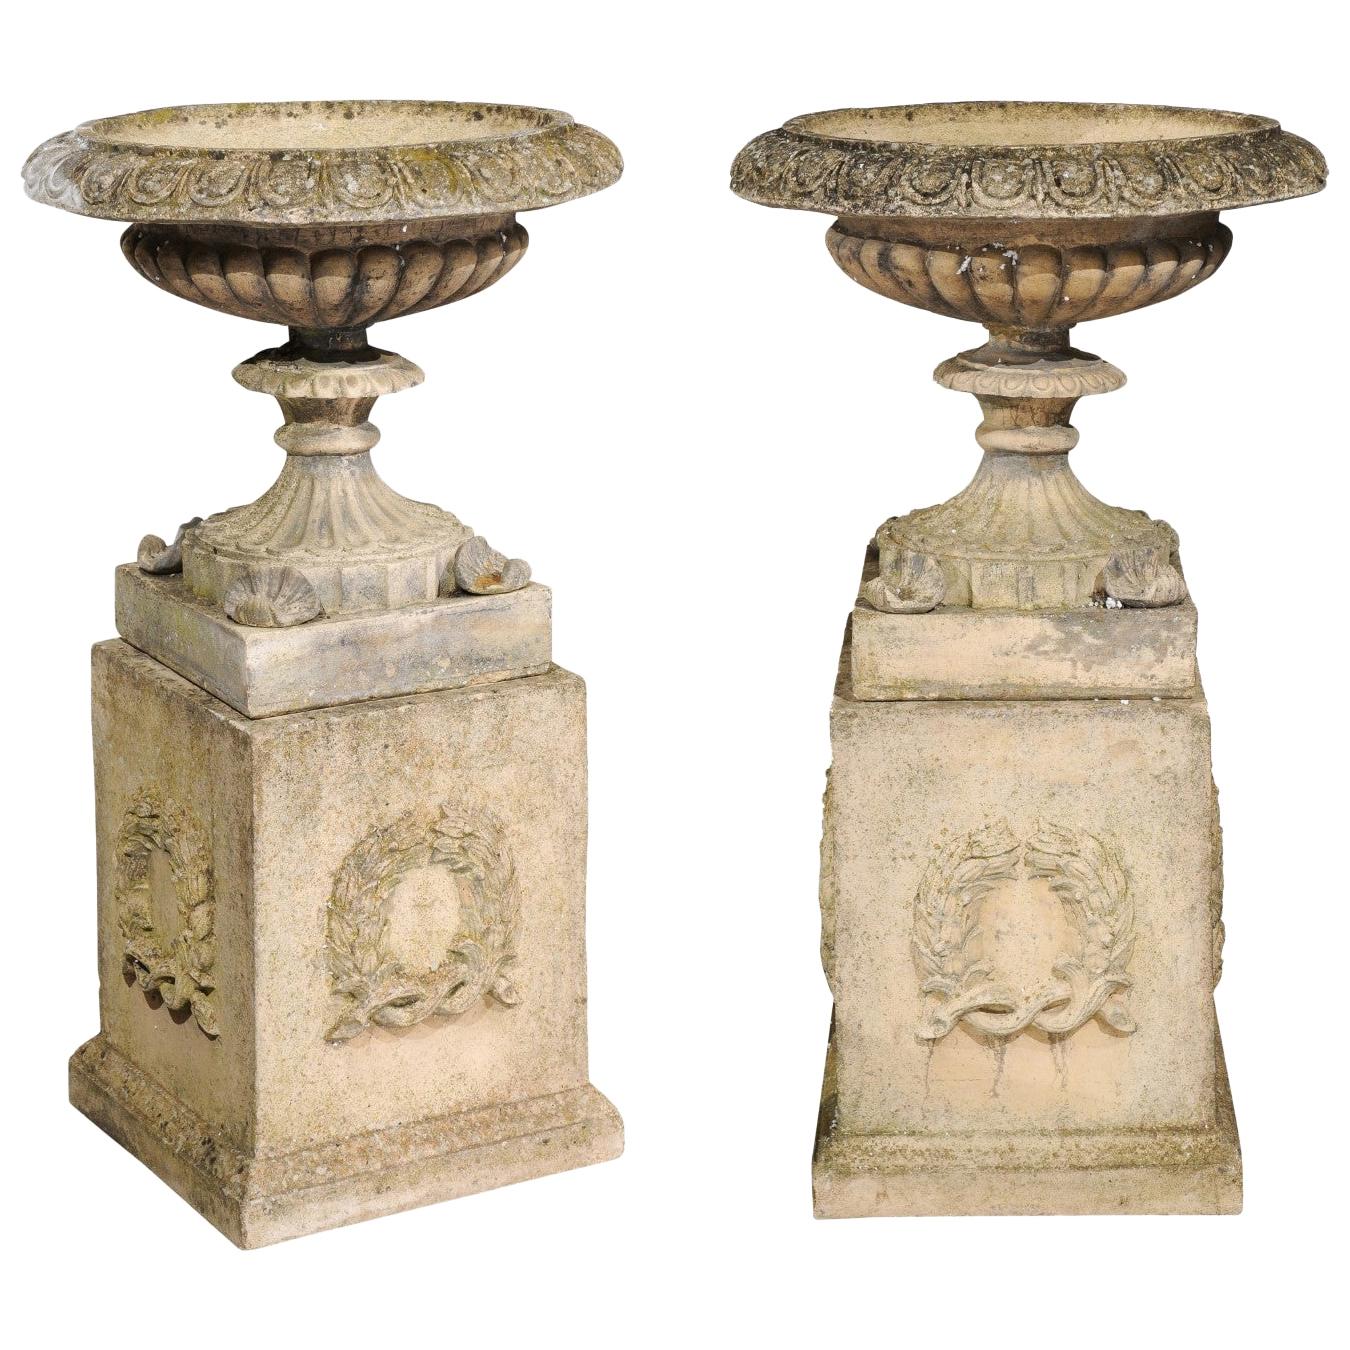 Pair of English Stone Garden Urns on Pedestals with Laurel Wreaths and Gadroons